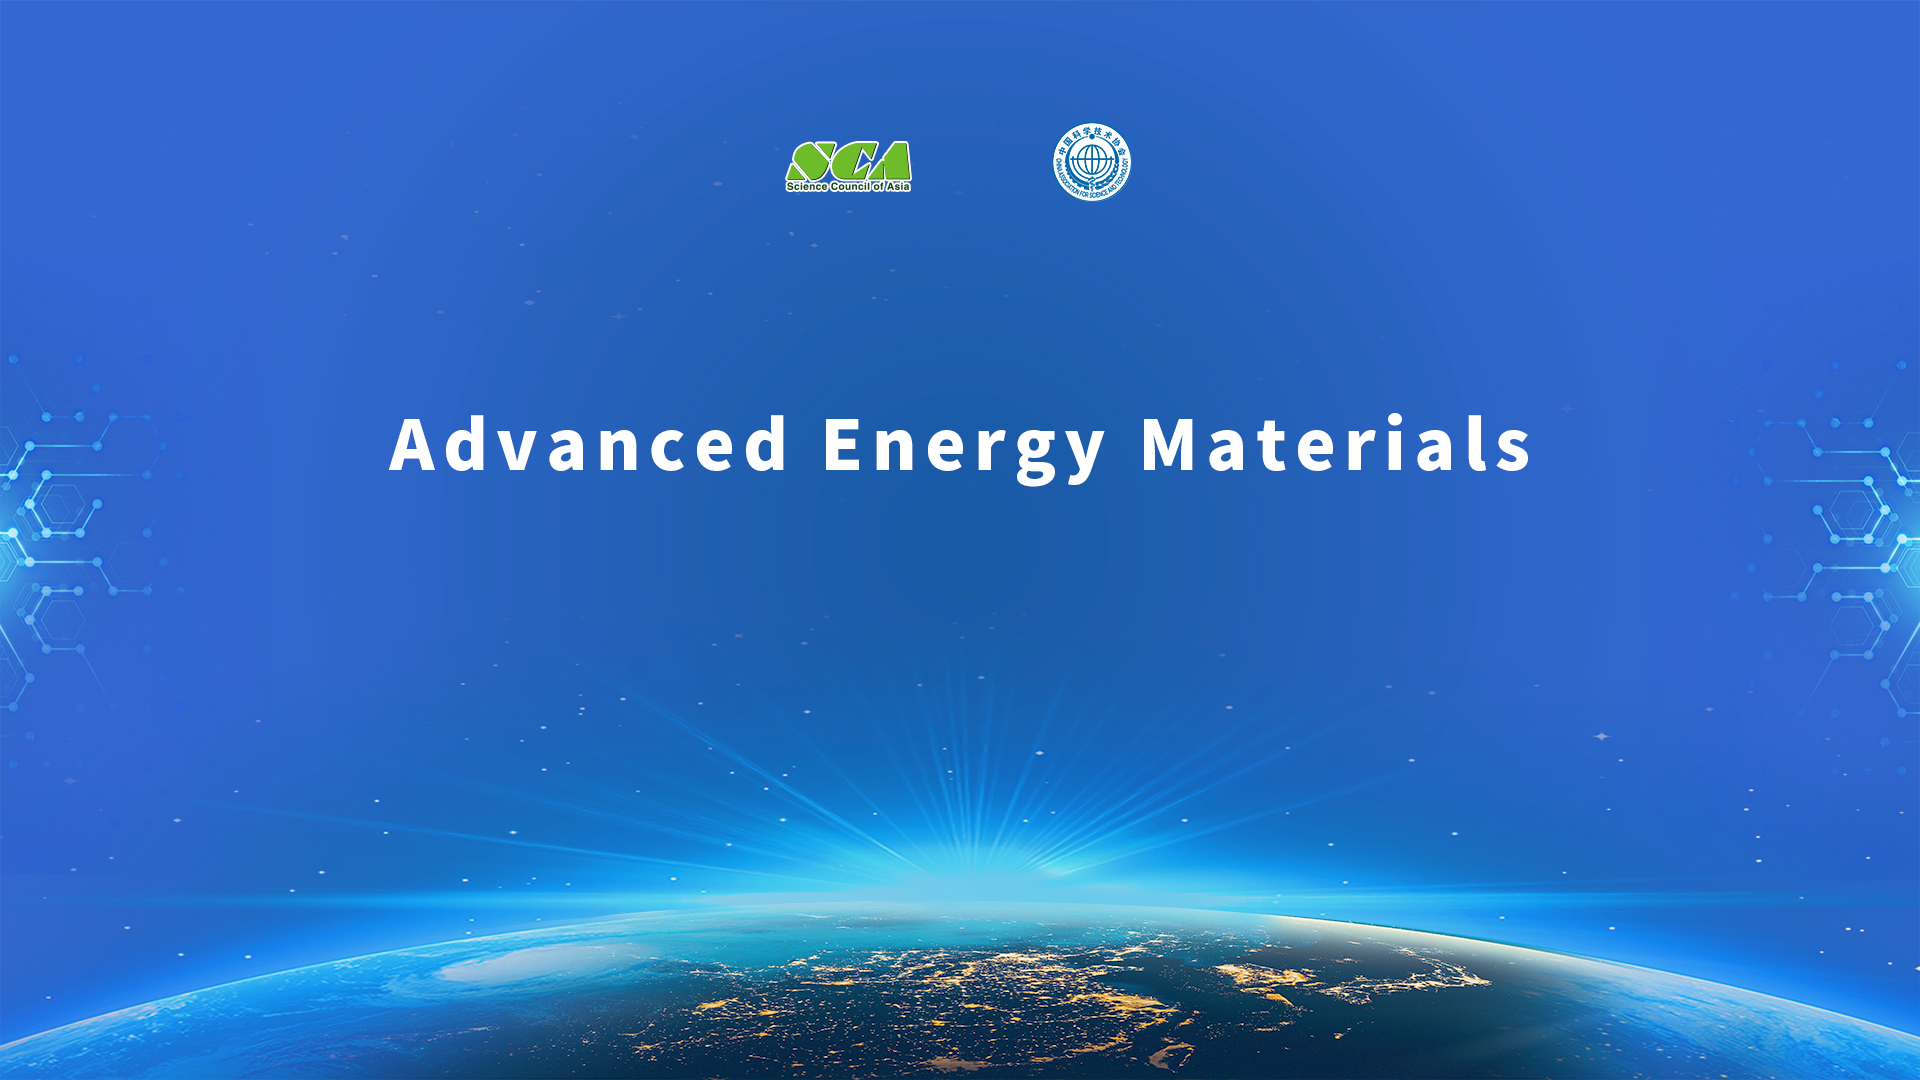 Session 6: Advanced Energy Materials